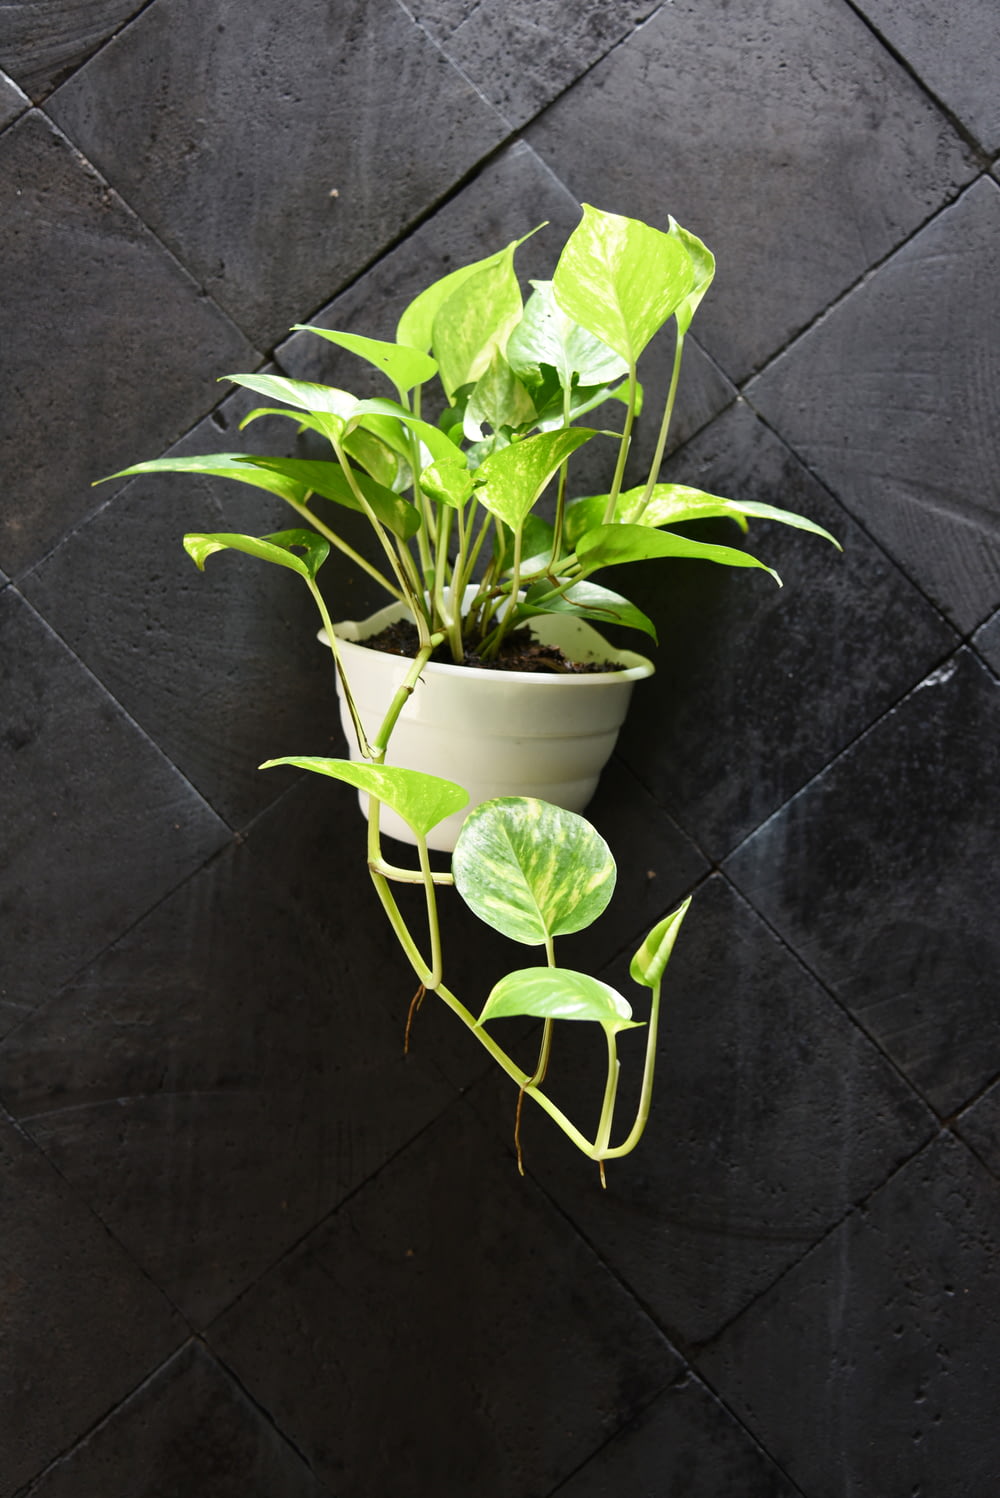 a potted plant on a black tile floor